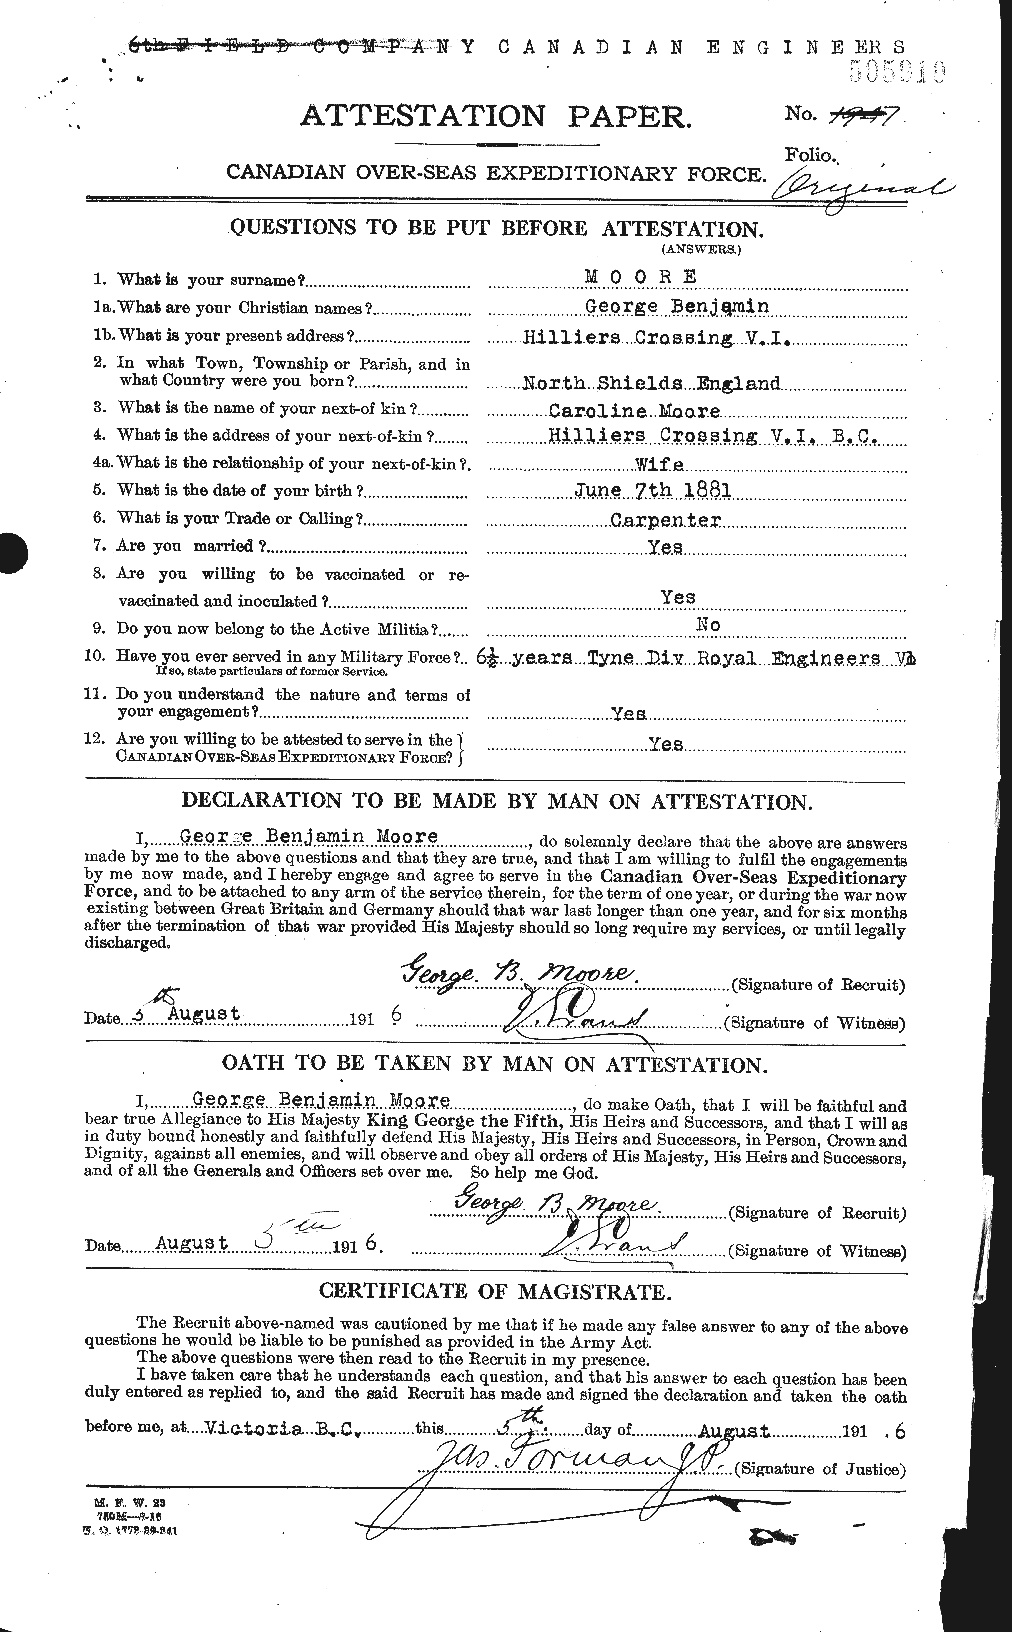 Personnel Records of the First World War - CEF 501991a